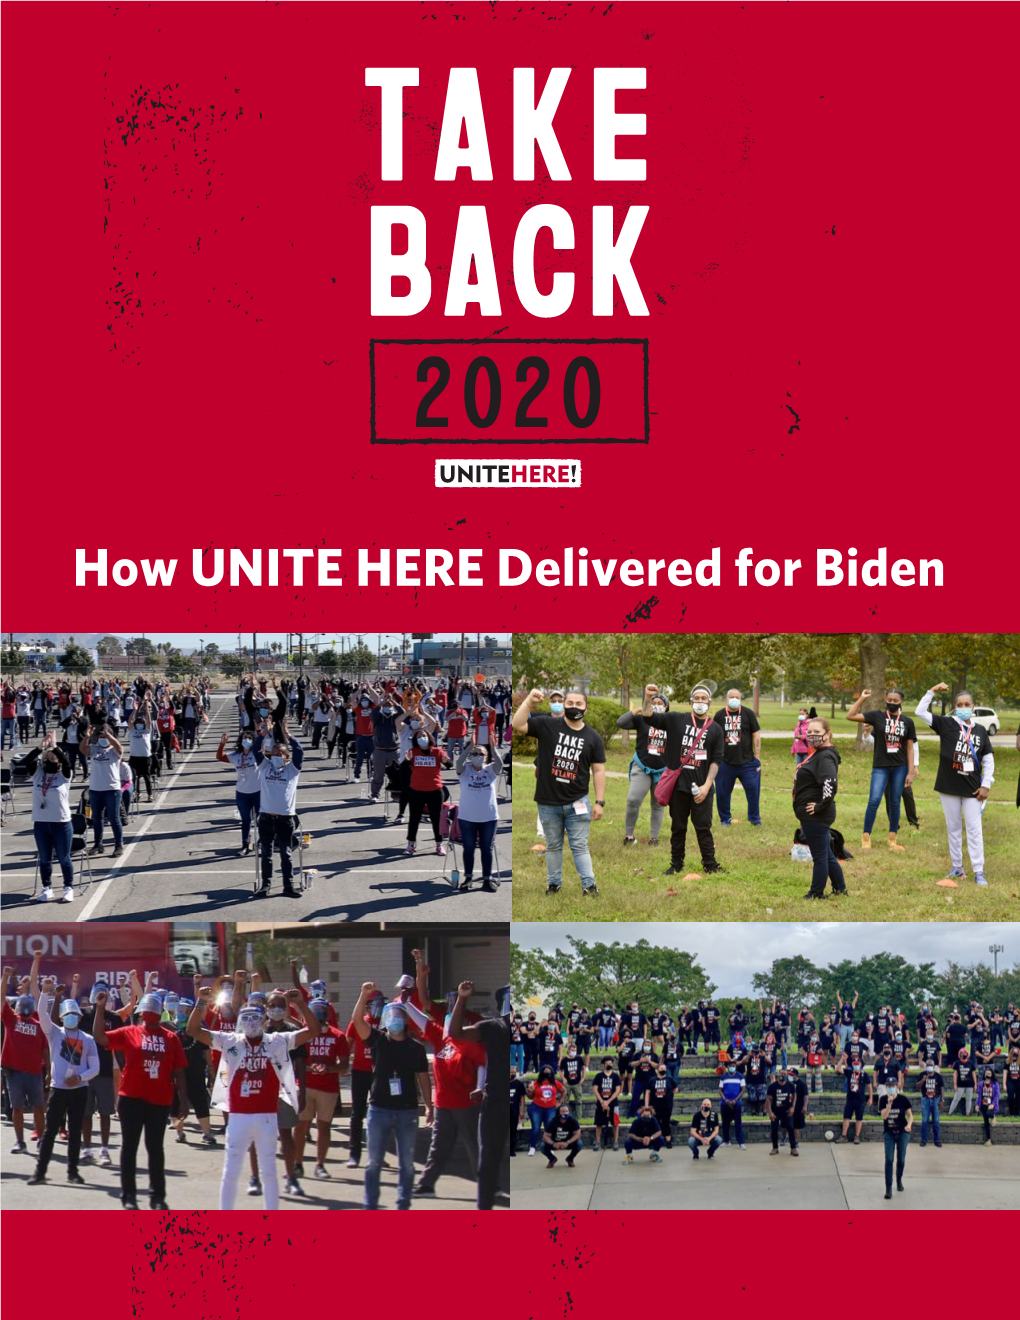 How UNITE HERE Delivered for Biden Dear Friends